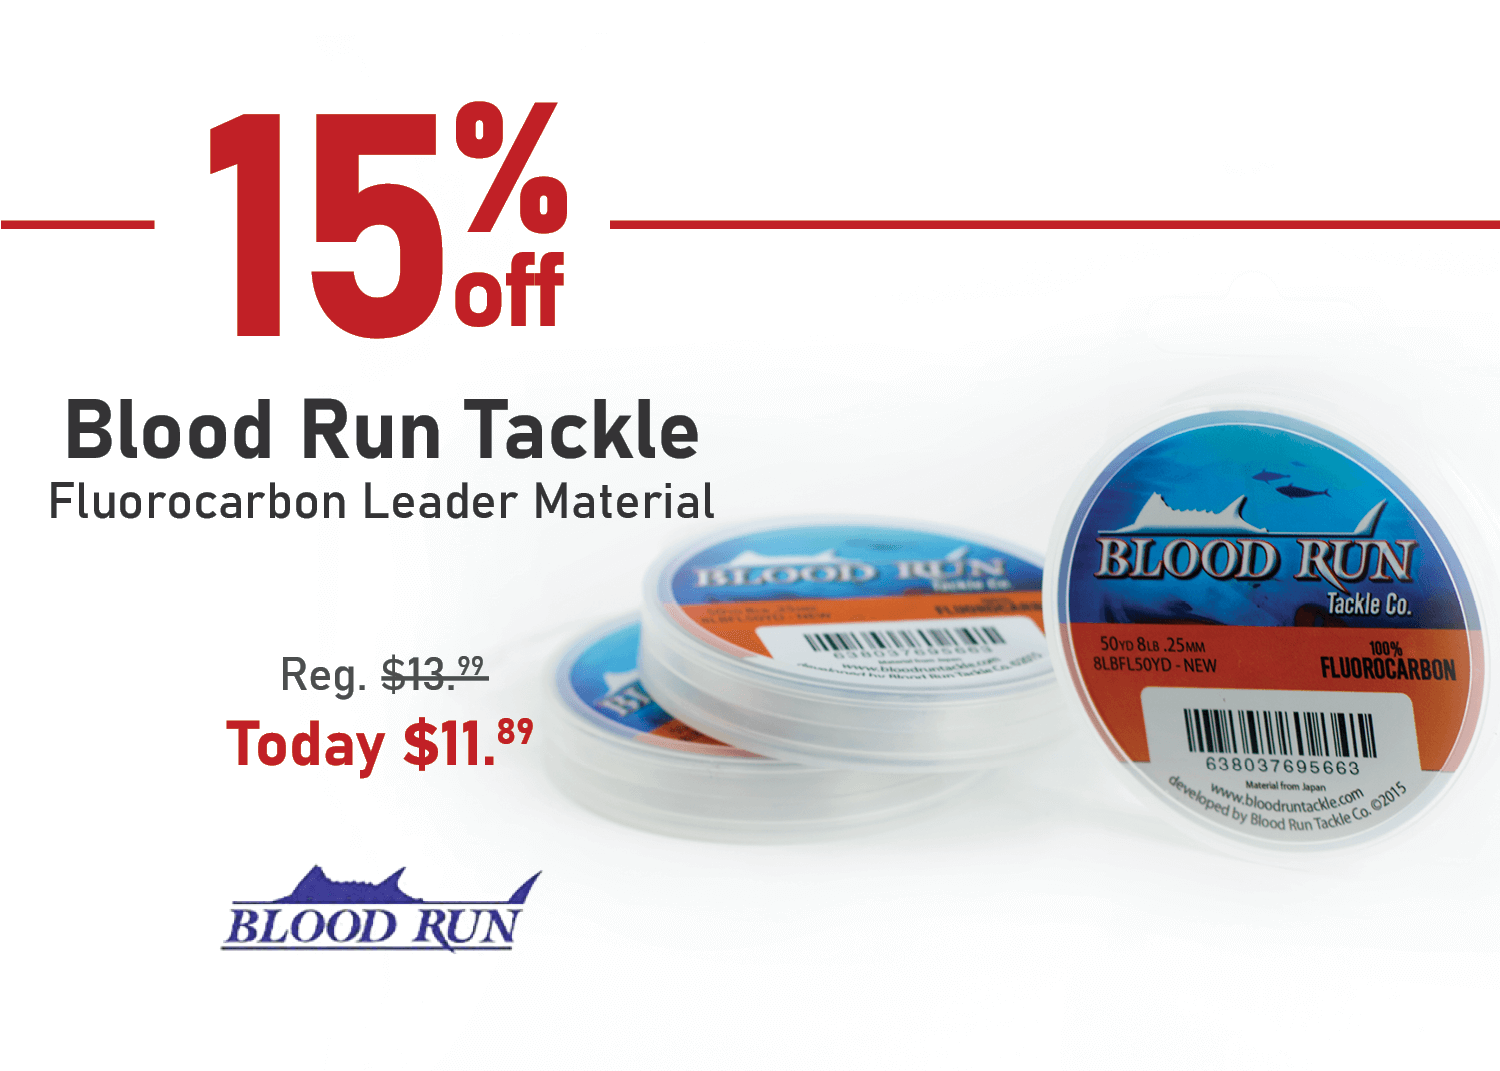 Save 15% on Blood Run Tackle Fluorocarbon Leader Material